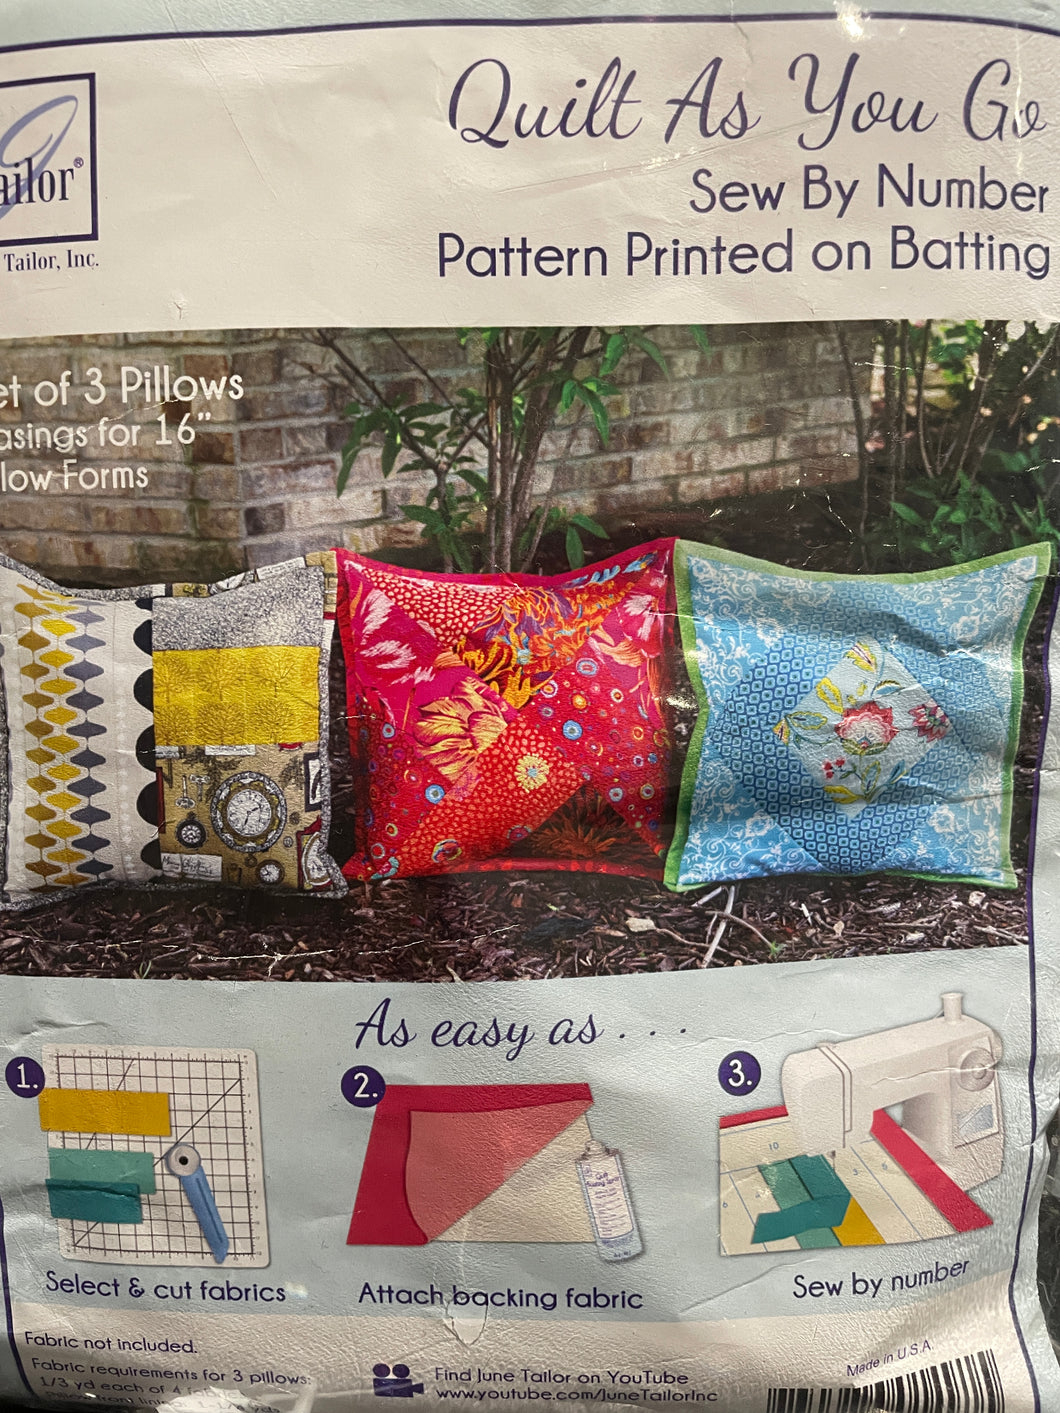 June Tailor  Quilt As You Go  Sew by Numbers  Pillows/Cushions